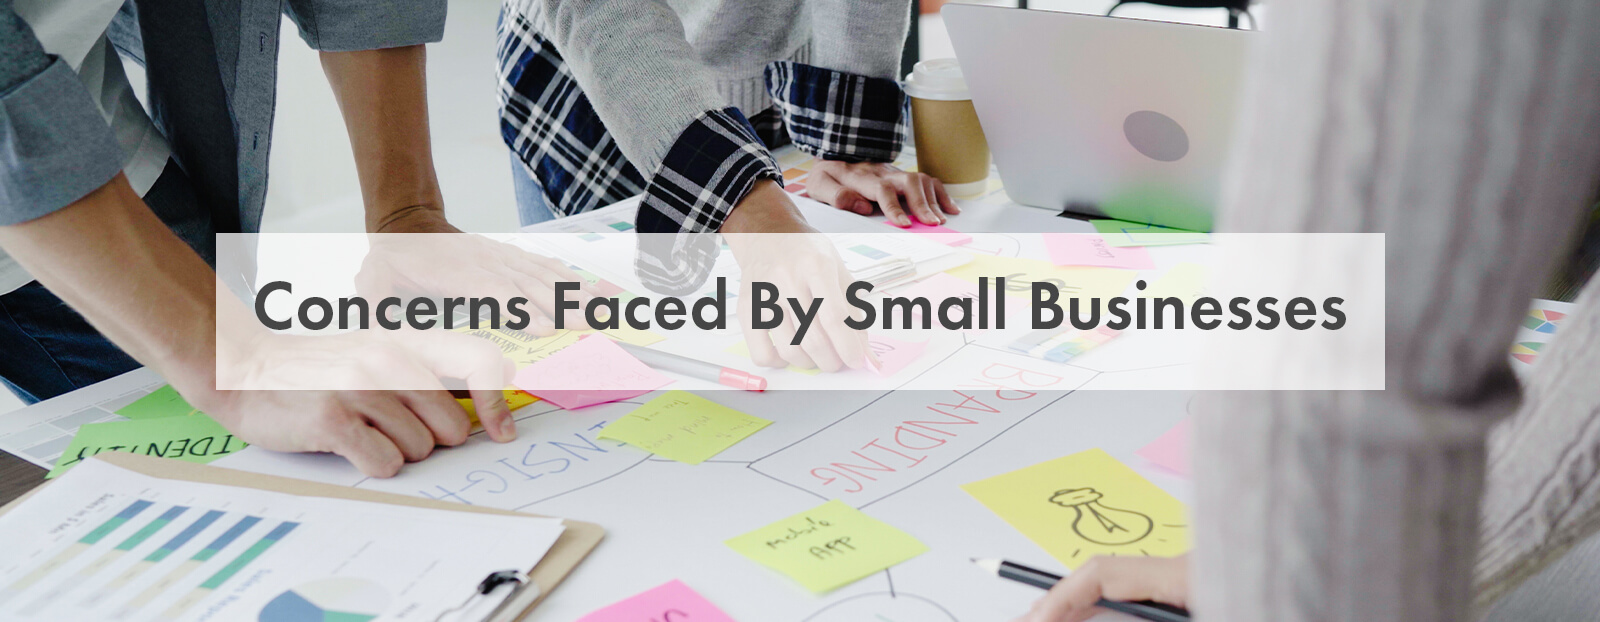 Concerns Faced By Small Businesses